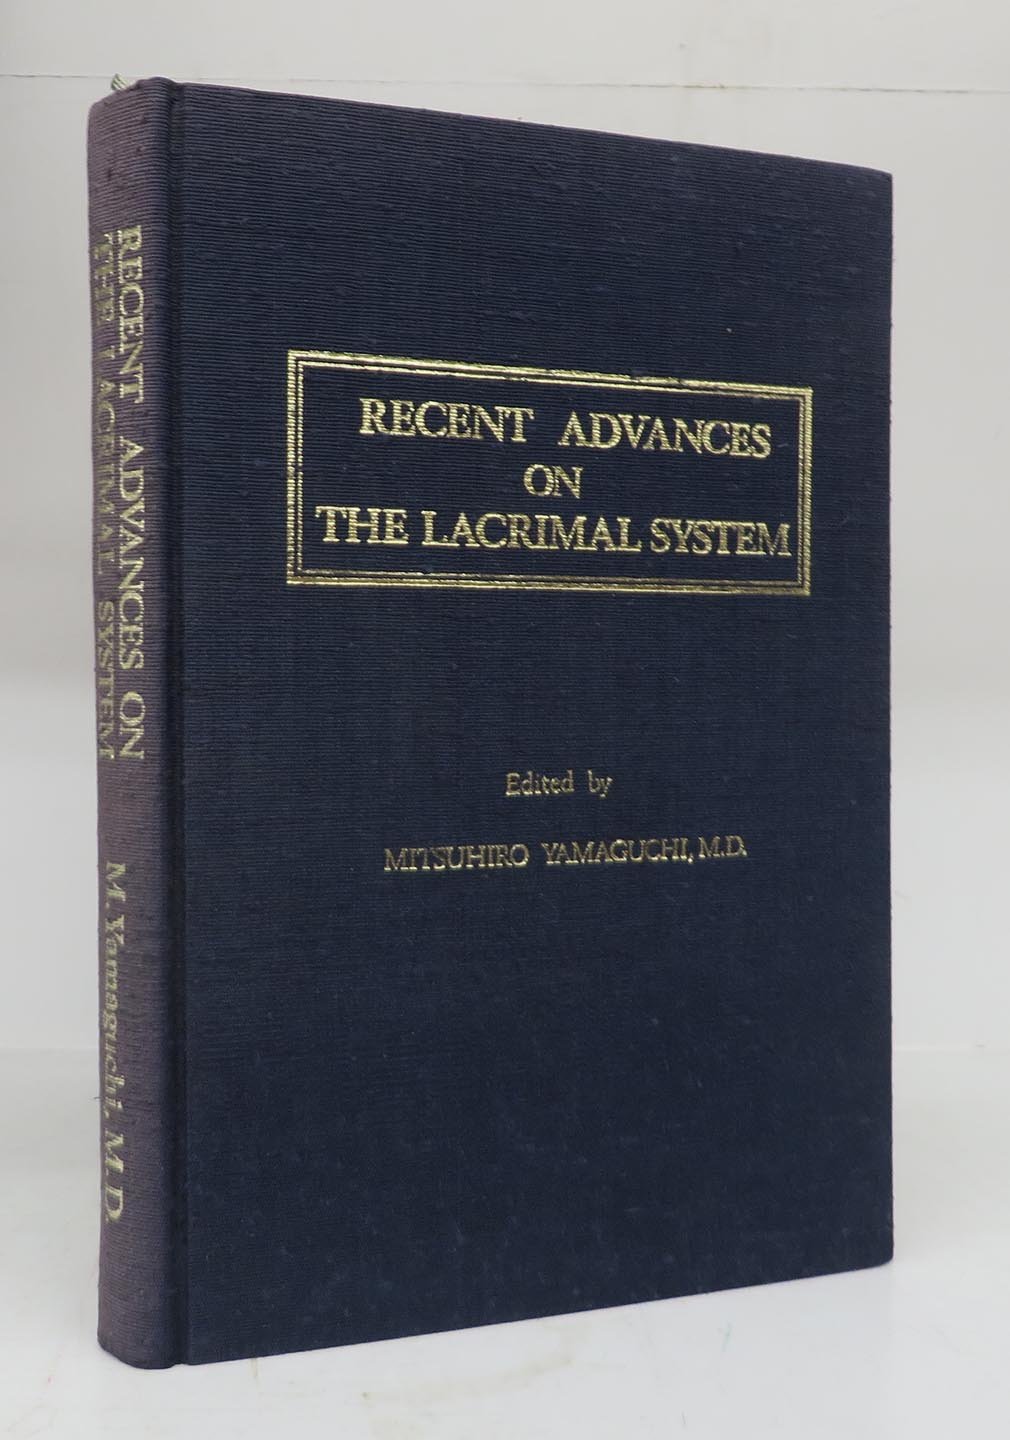 Recent Advances on the Lacrimal System